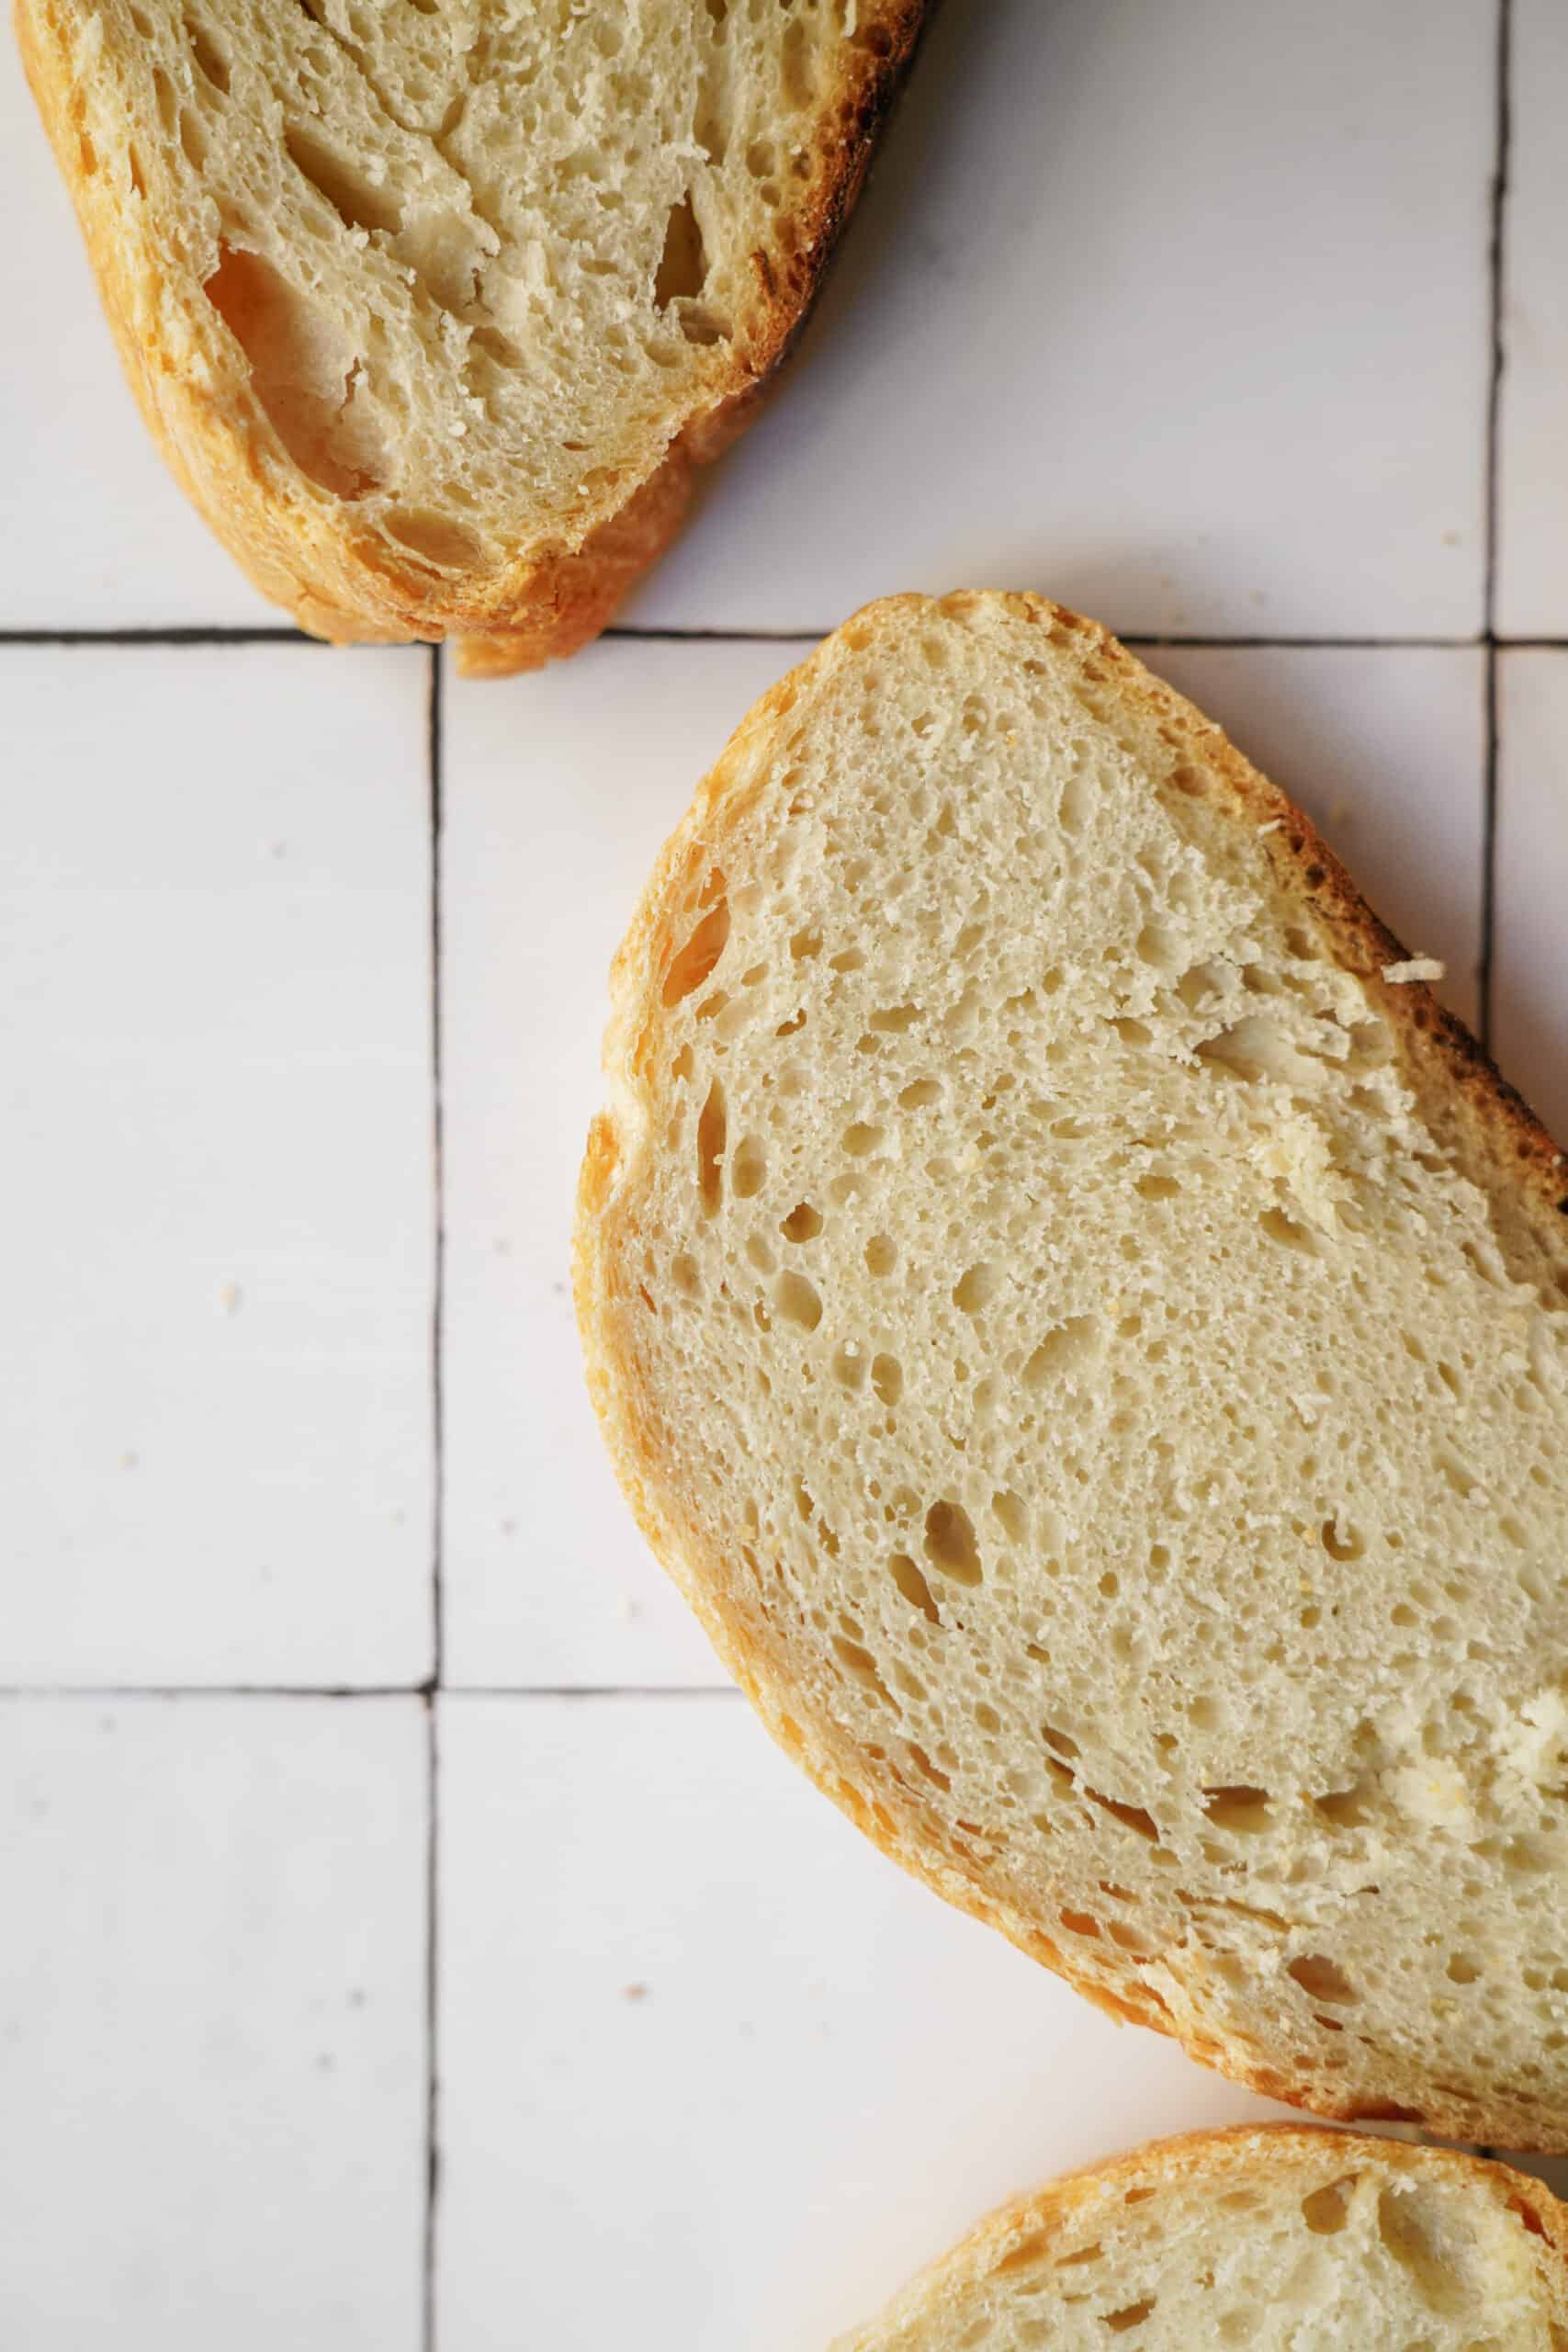 Slices of no-knead bread on counter